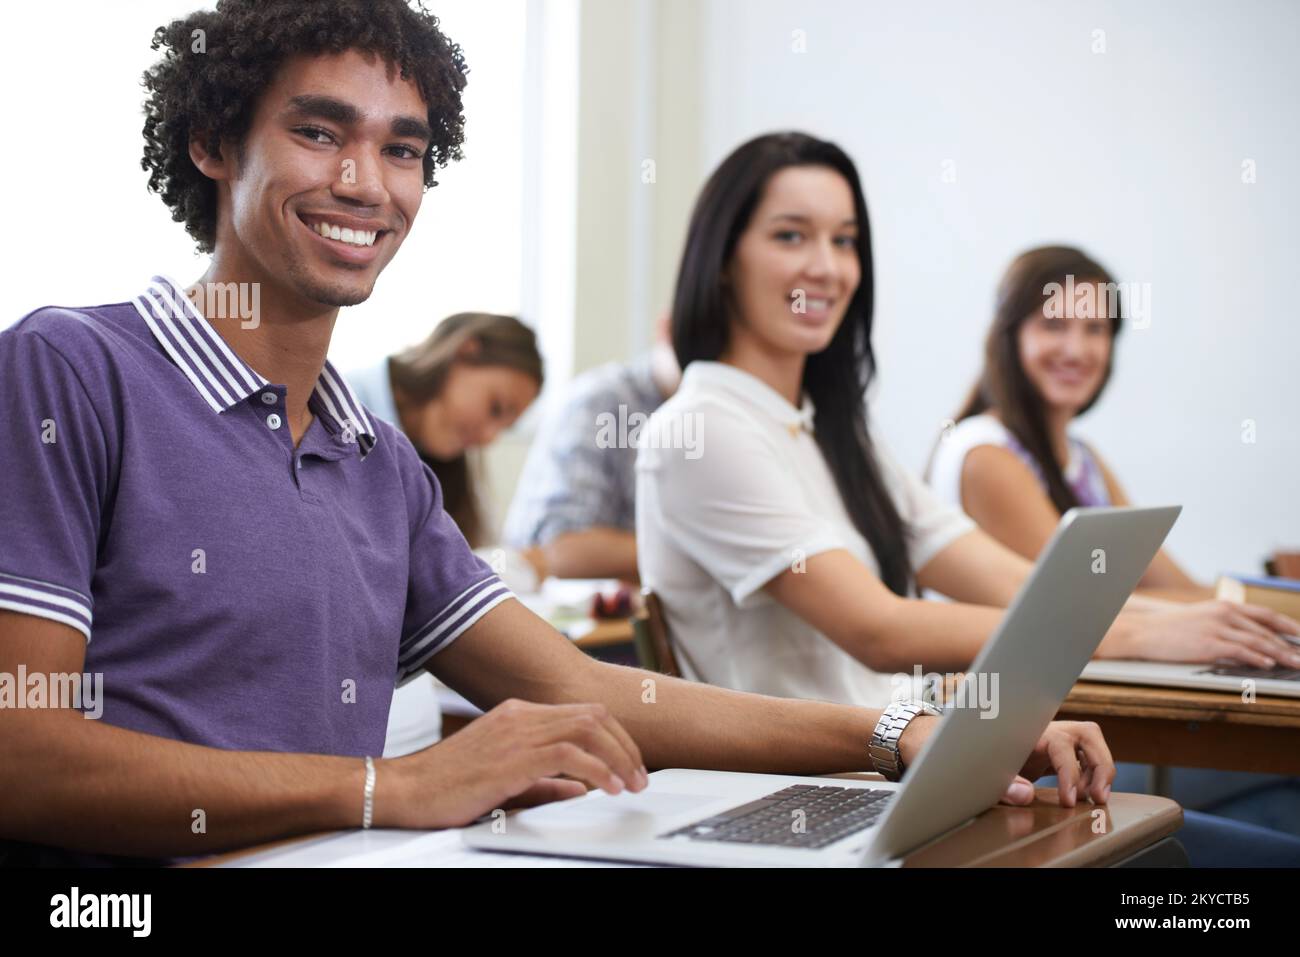 Future software developers...Portrait of a group of smiling university students working on laptops in class. Stock Photo